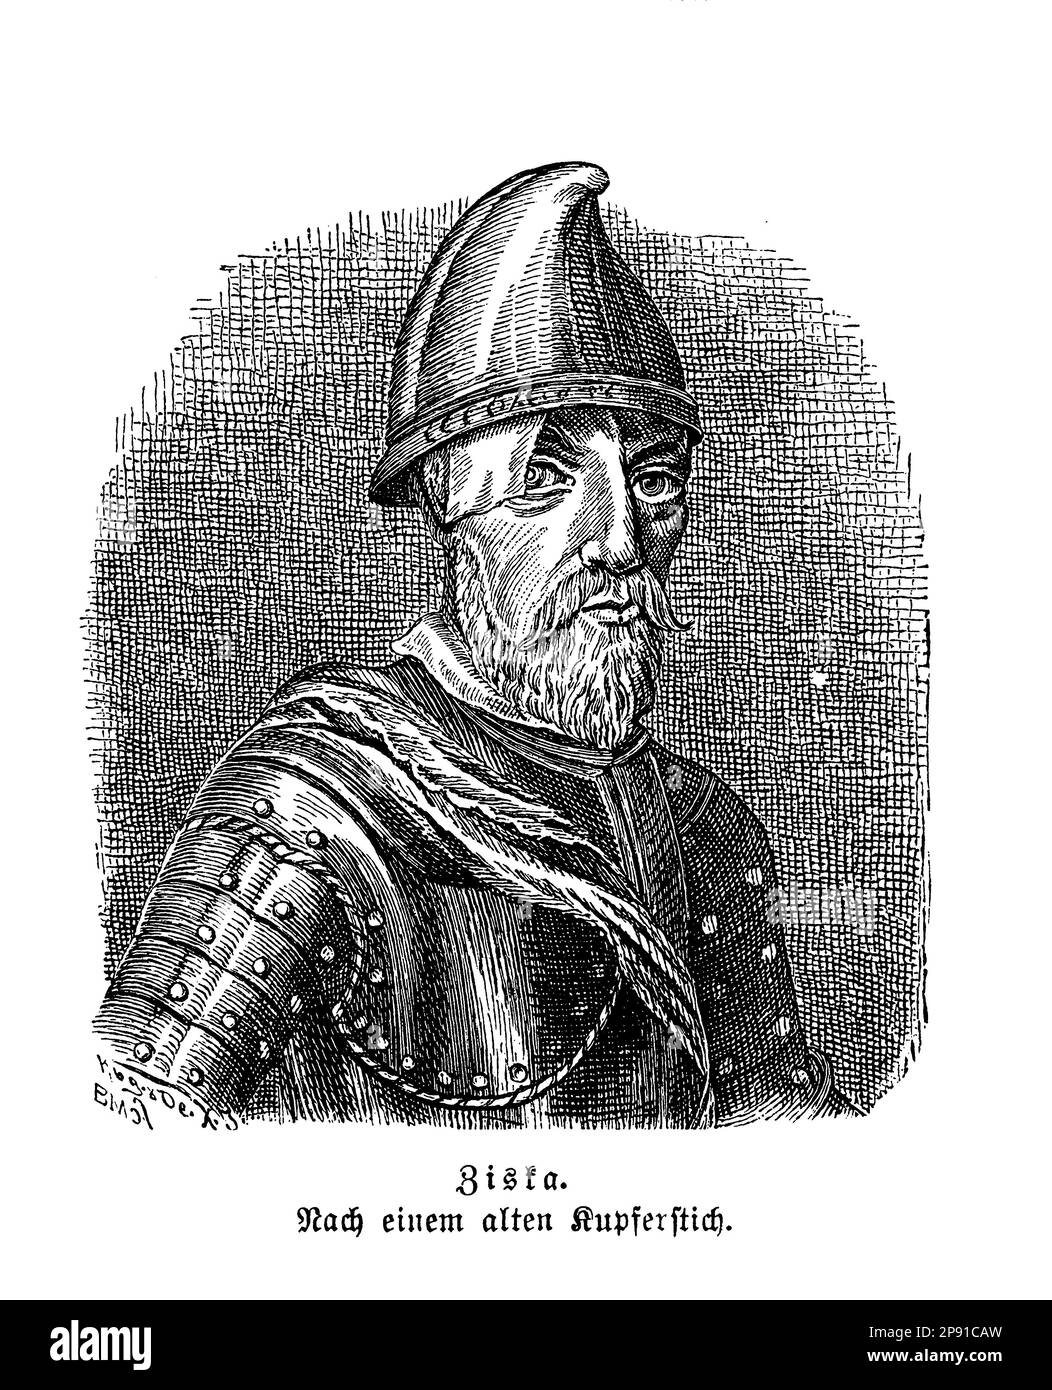 Jan Zizka was a Czech military leader and Hussite revolutionary who played a key role in the Hussite Wars, a series of conflicts in Bohemia in the early 15th century. He was known for his innovative military tactics and his ability to lead his troops to victory against larger, better-equipped armies. He is regarded as a national hero in the Czech Republic Stock Photo